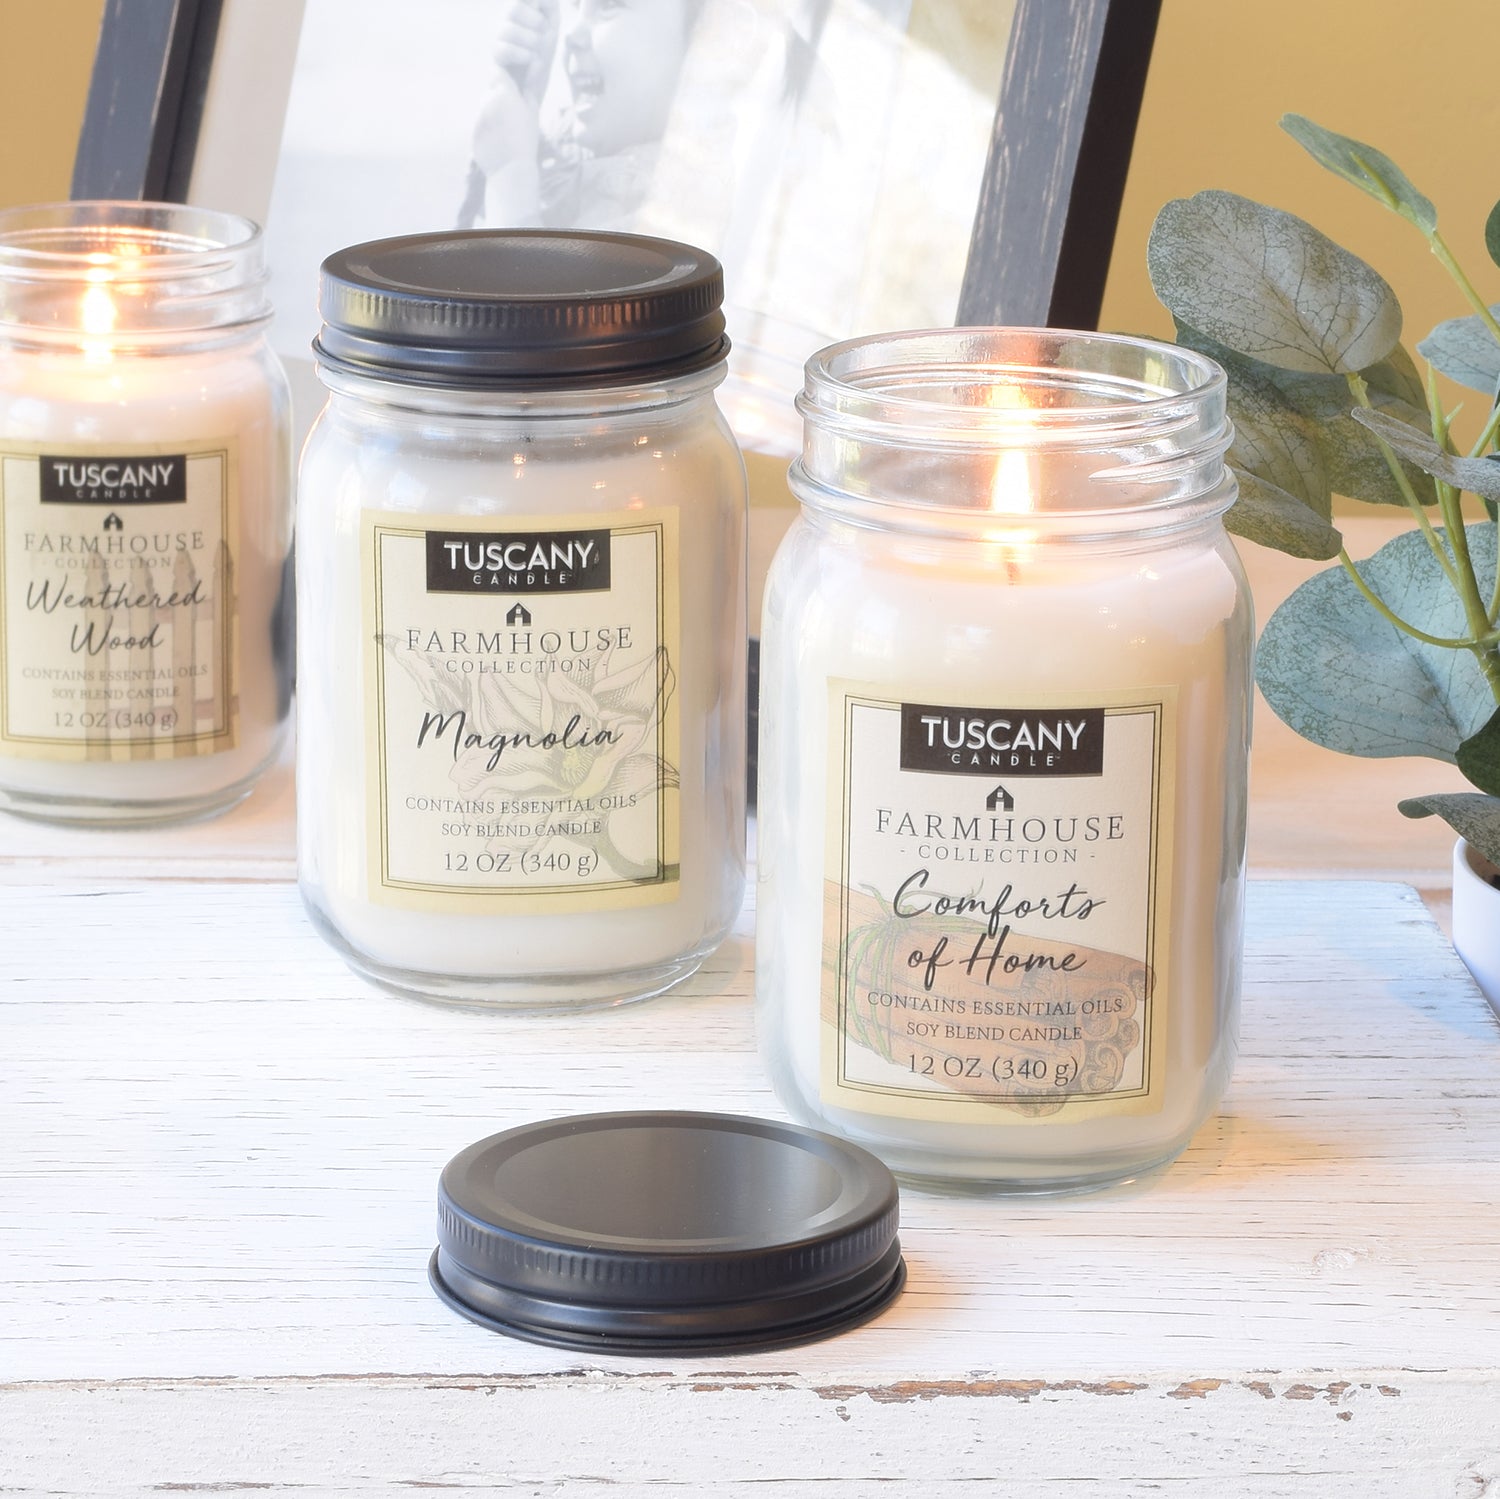 Three jars of candles, including a Tuscany Candle Magnolia scented jar candle (12 oz) from the Farmhouse collection, are displayed on a table next to a plant.